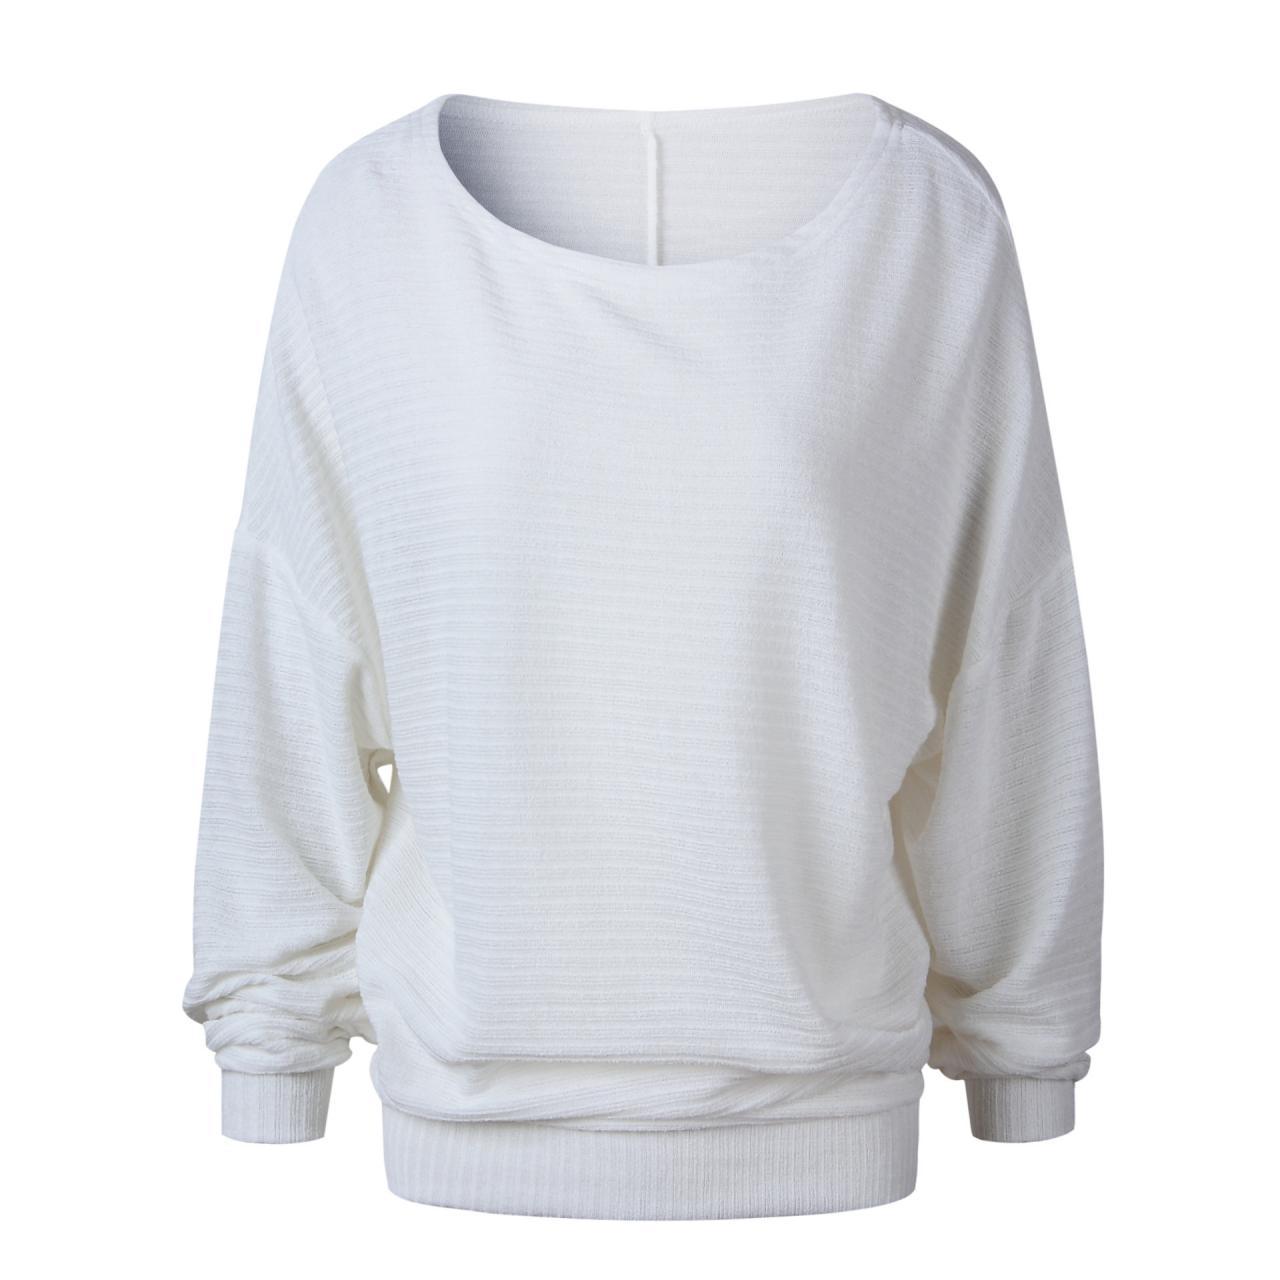 Women Knitted Sweater Spring Autumn Bat Long Sleeve Loose Oversized Pullover Tops off white